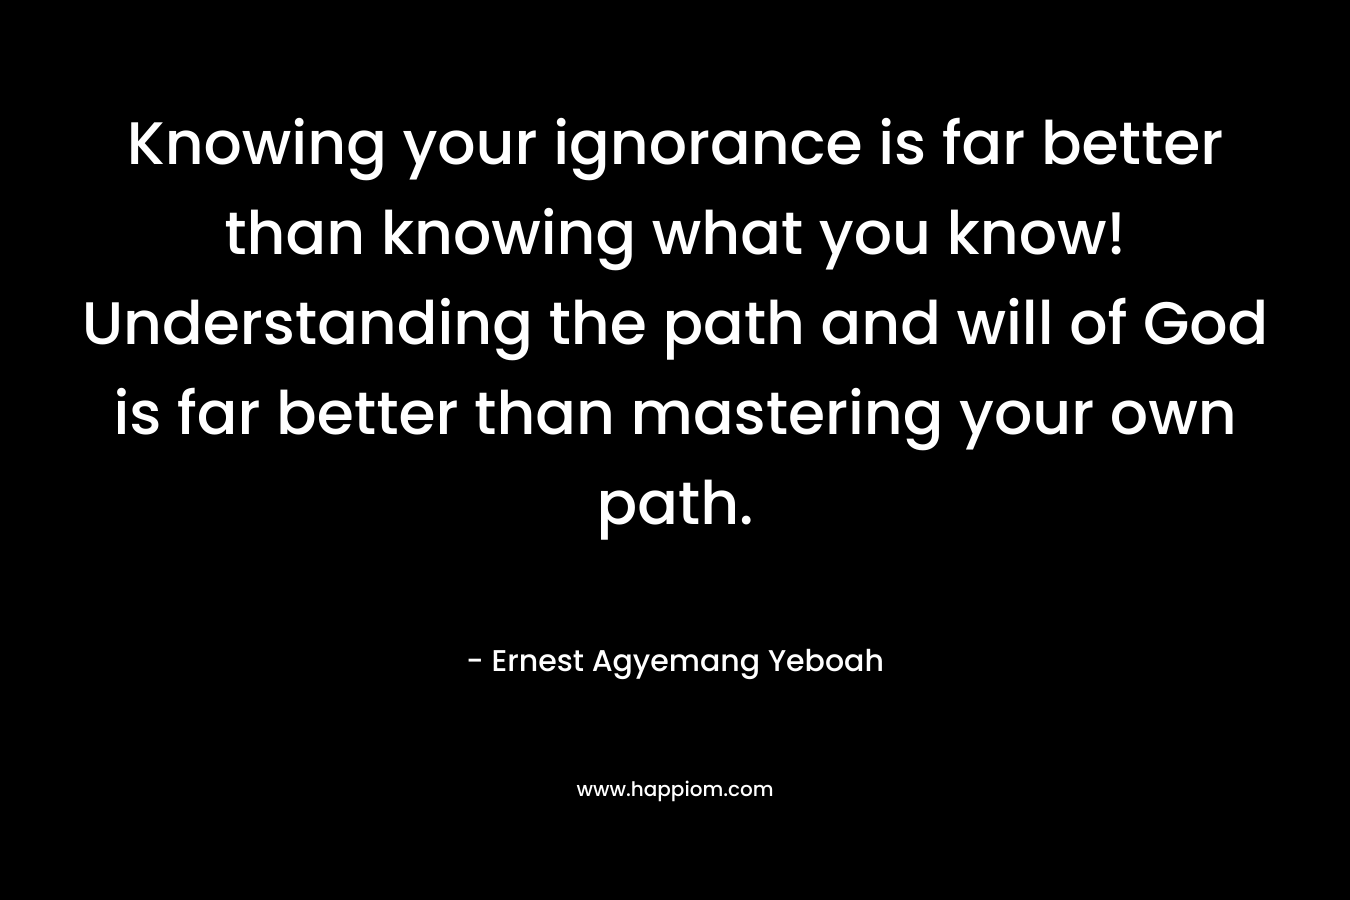 Knowing your ignorance is far better than knowing what you know! Understanding the path and will of God is far better than mastering your own path.